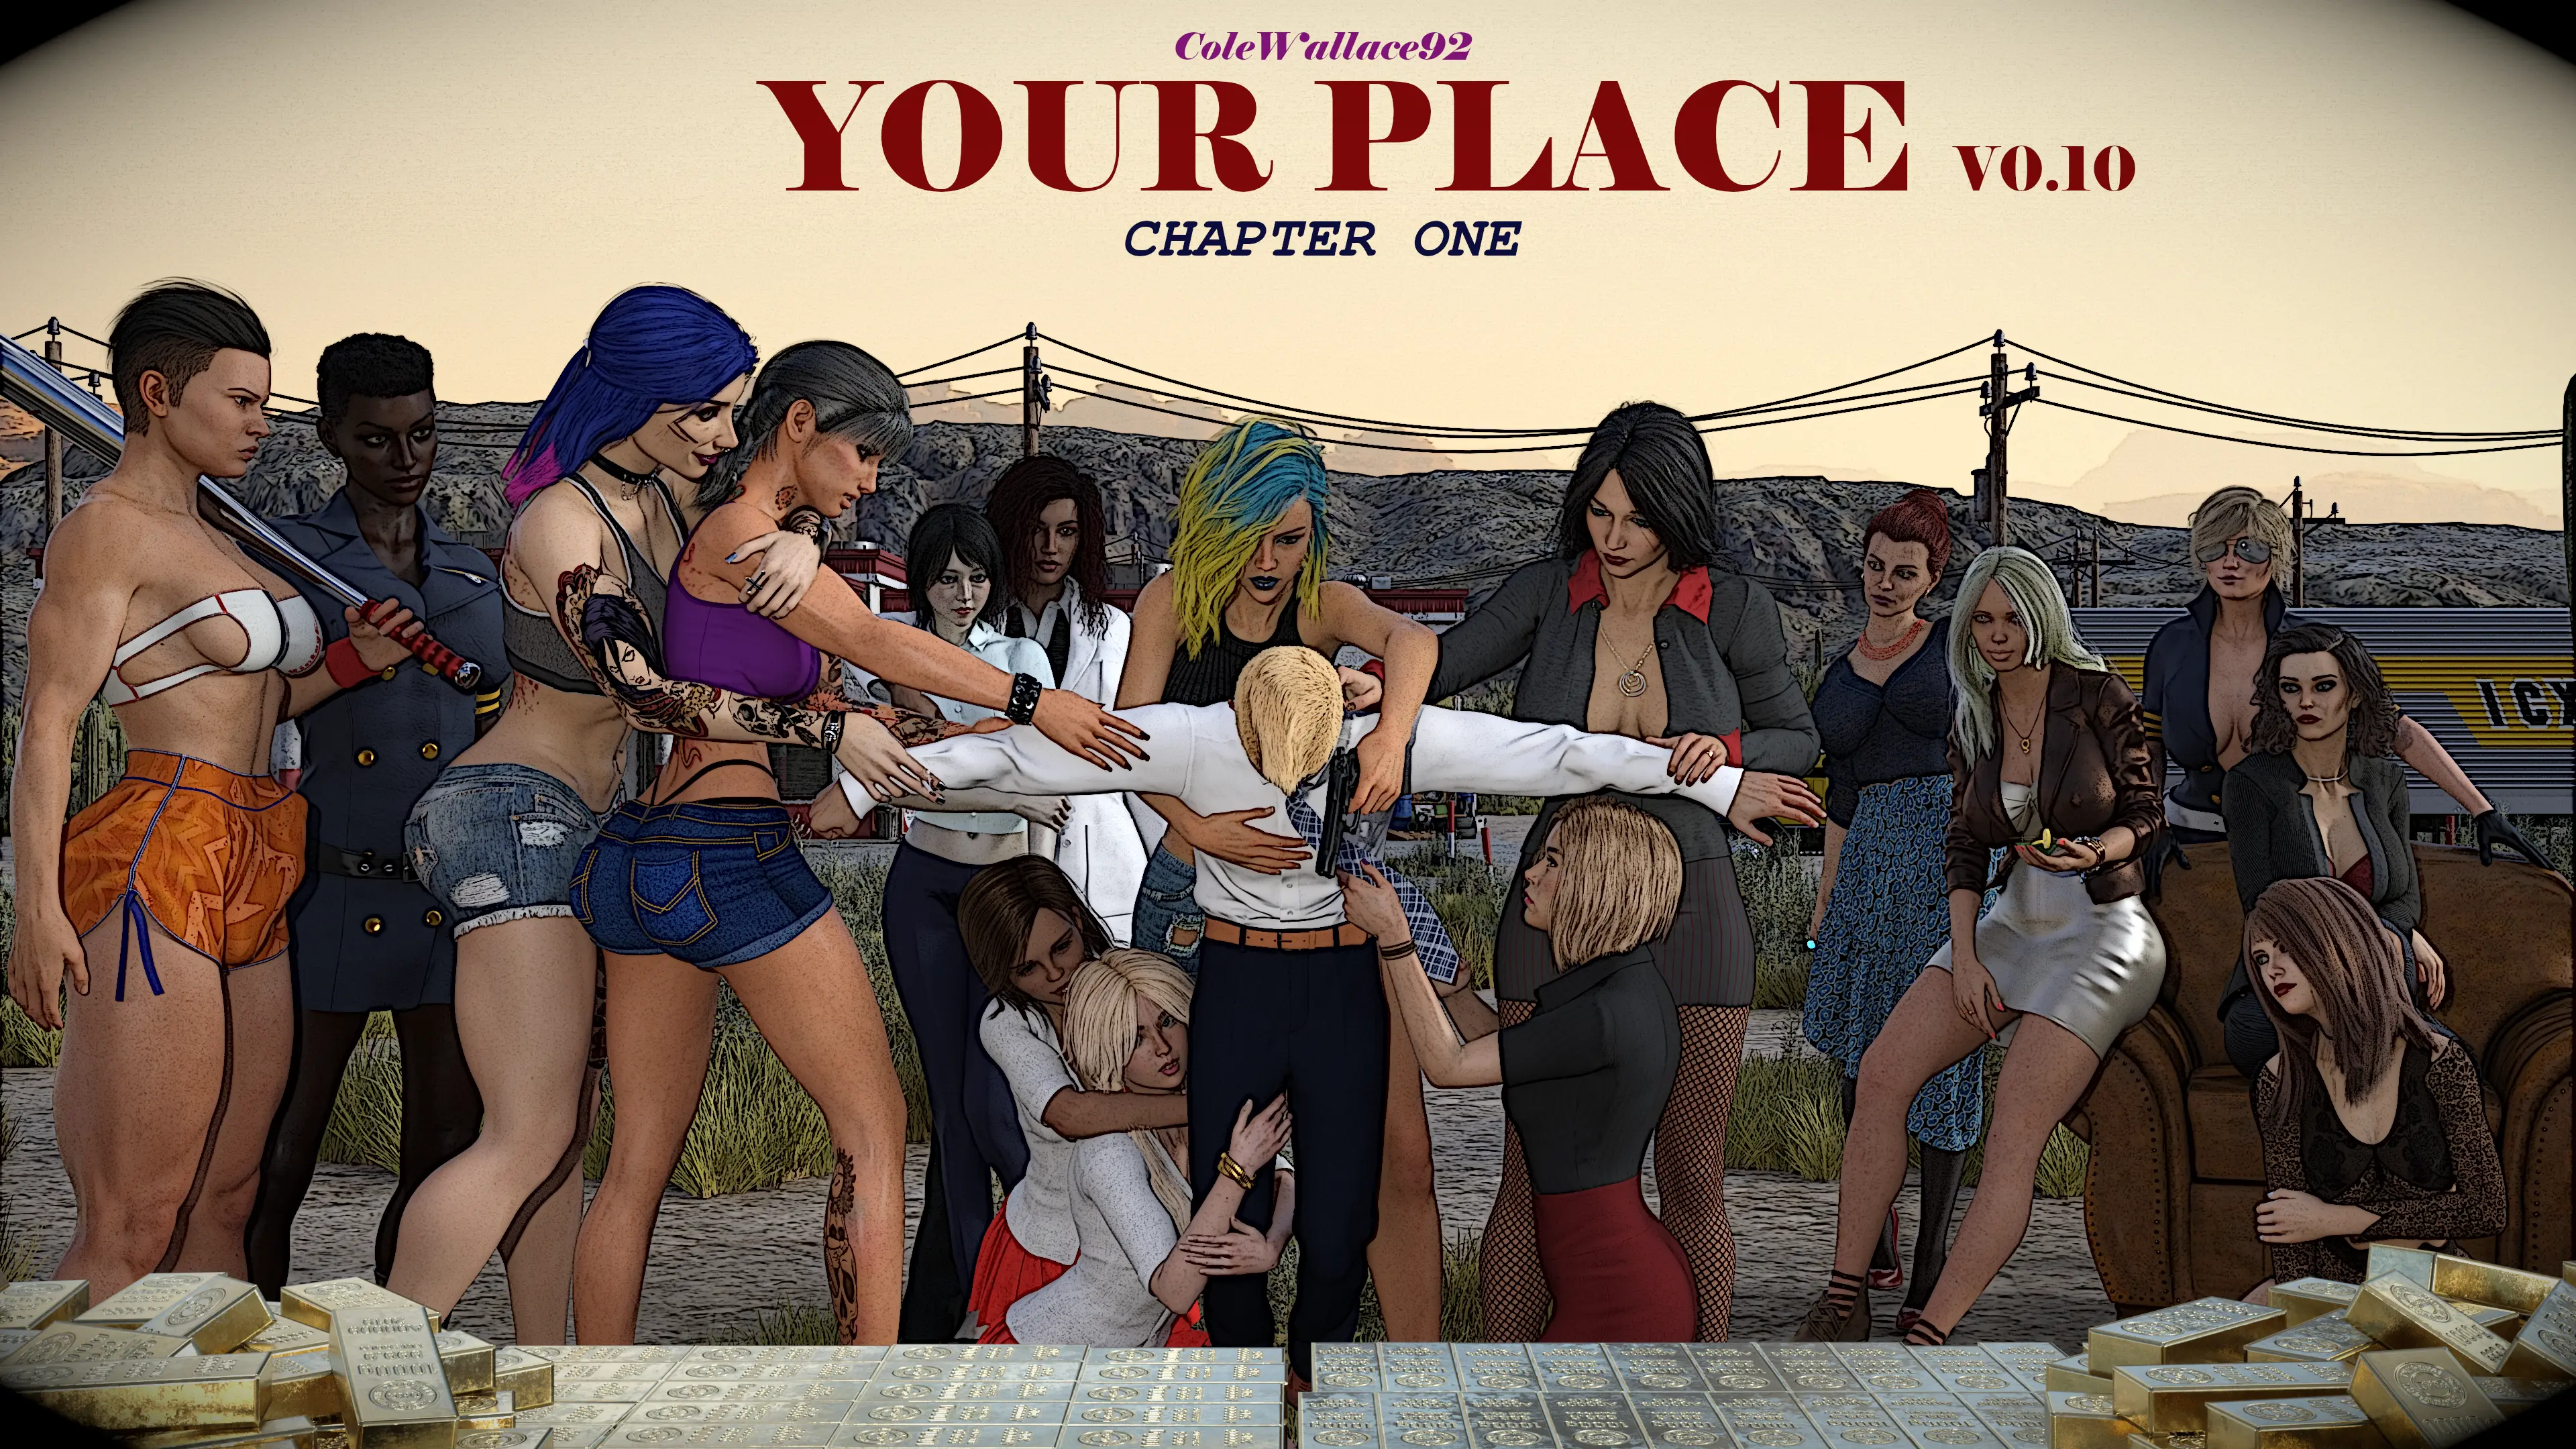 Your Place - Chapter 1 main image